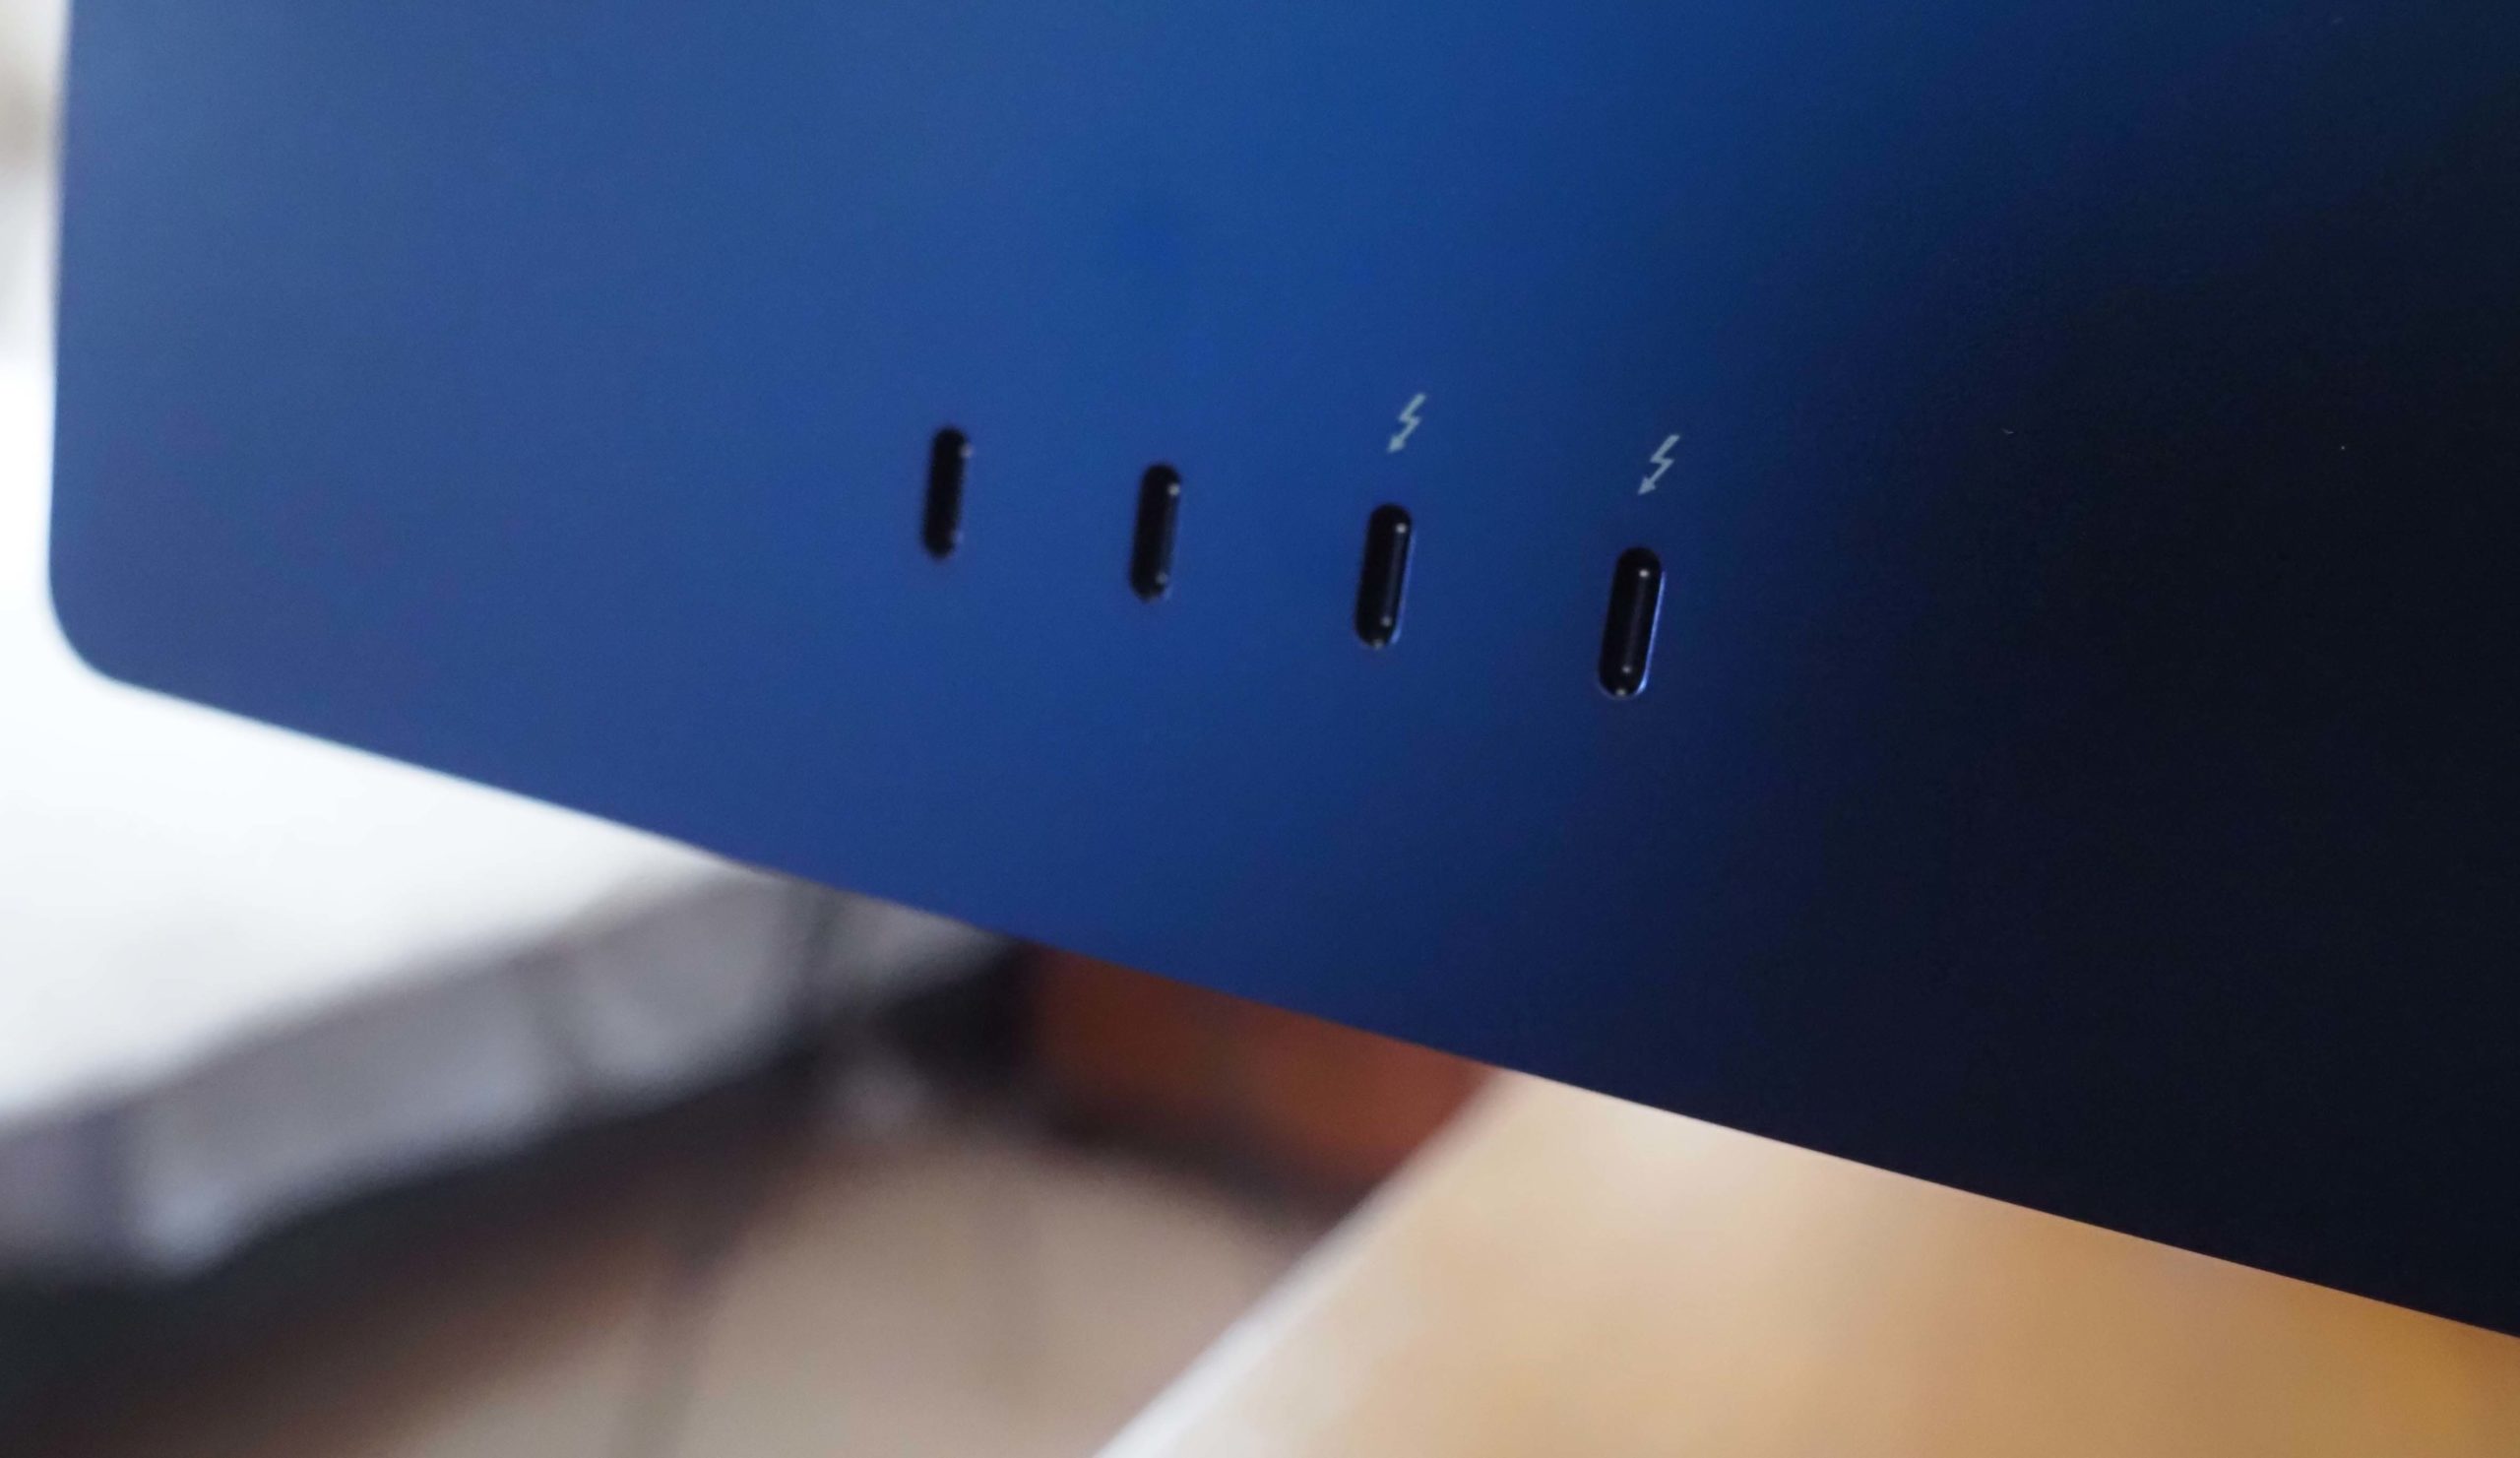 The $US1,499 ($1,929) iMac has four ports to the base model's two. (Photo: Caitlin McGarry/Gizmodo)